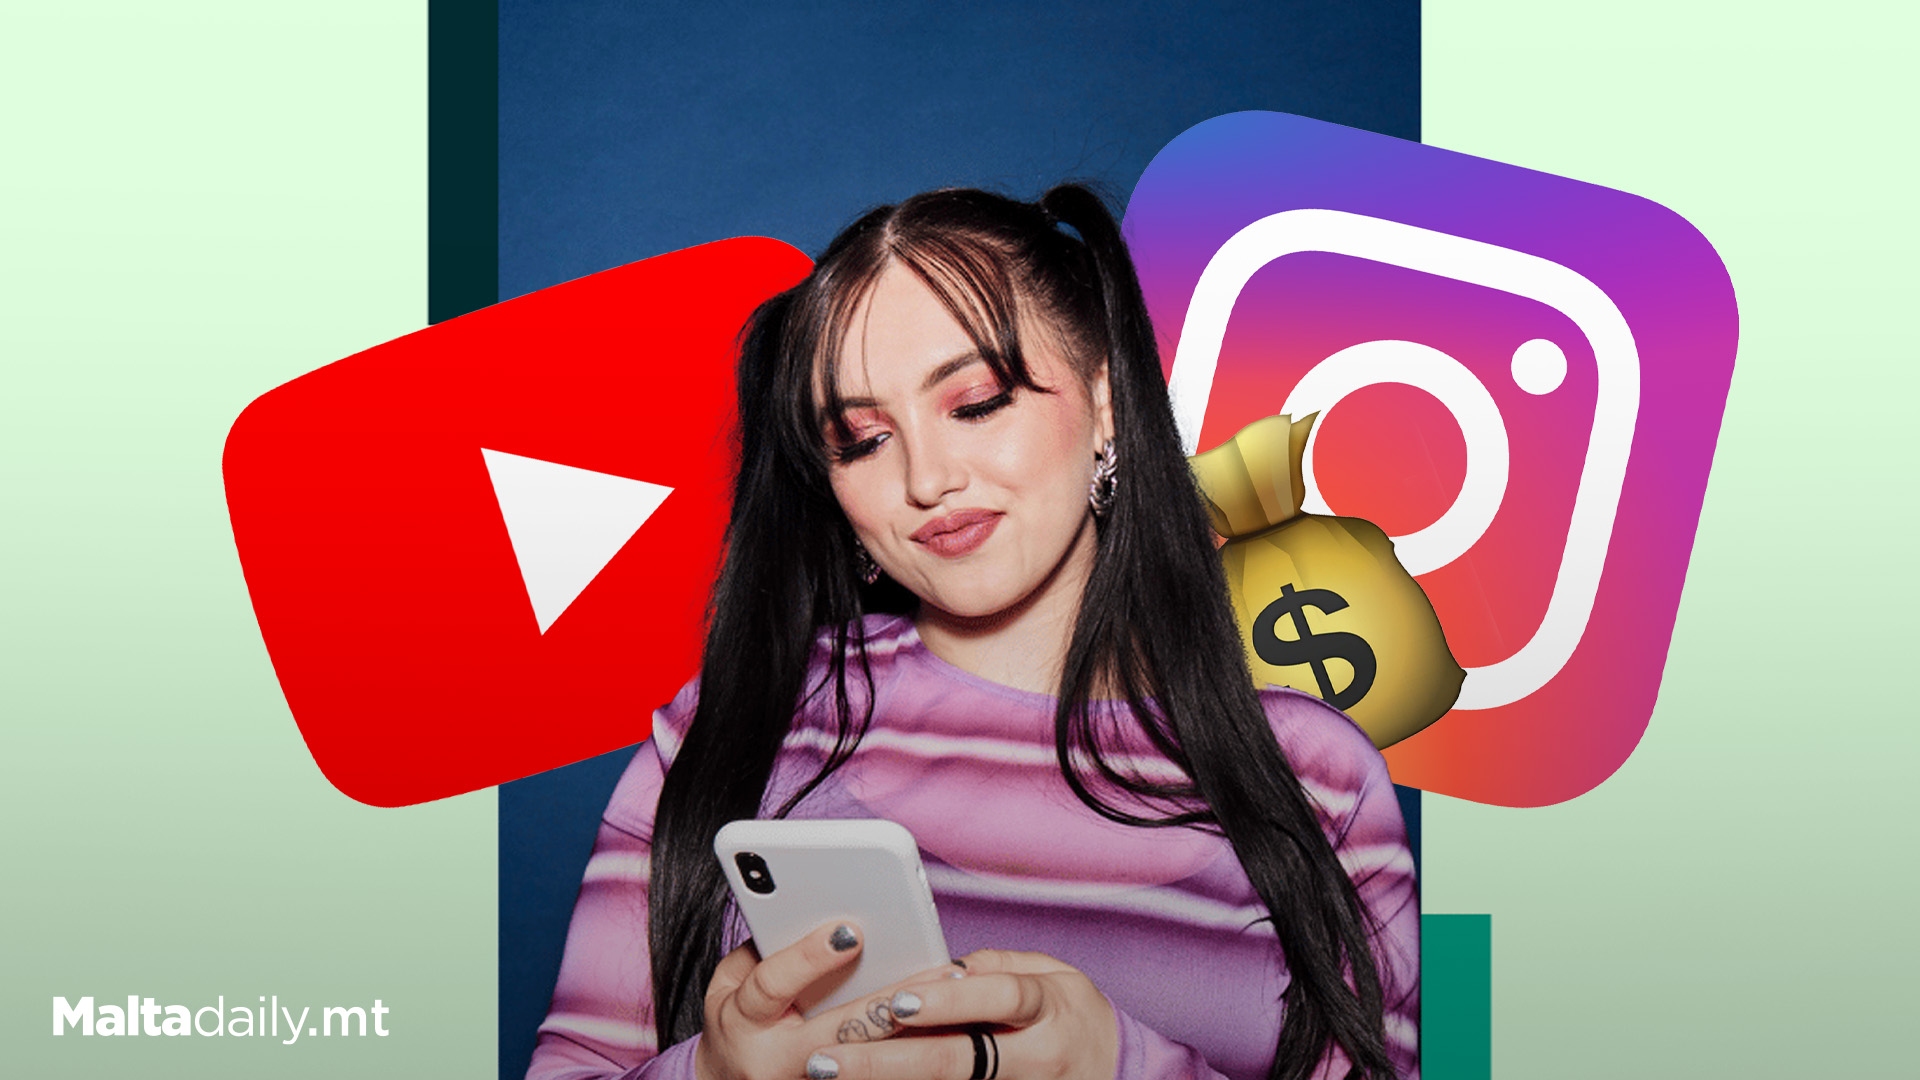 Instagram Makes More Money From Ads Than YouTube